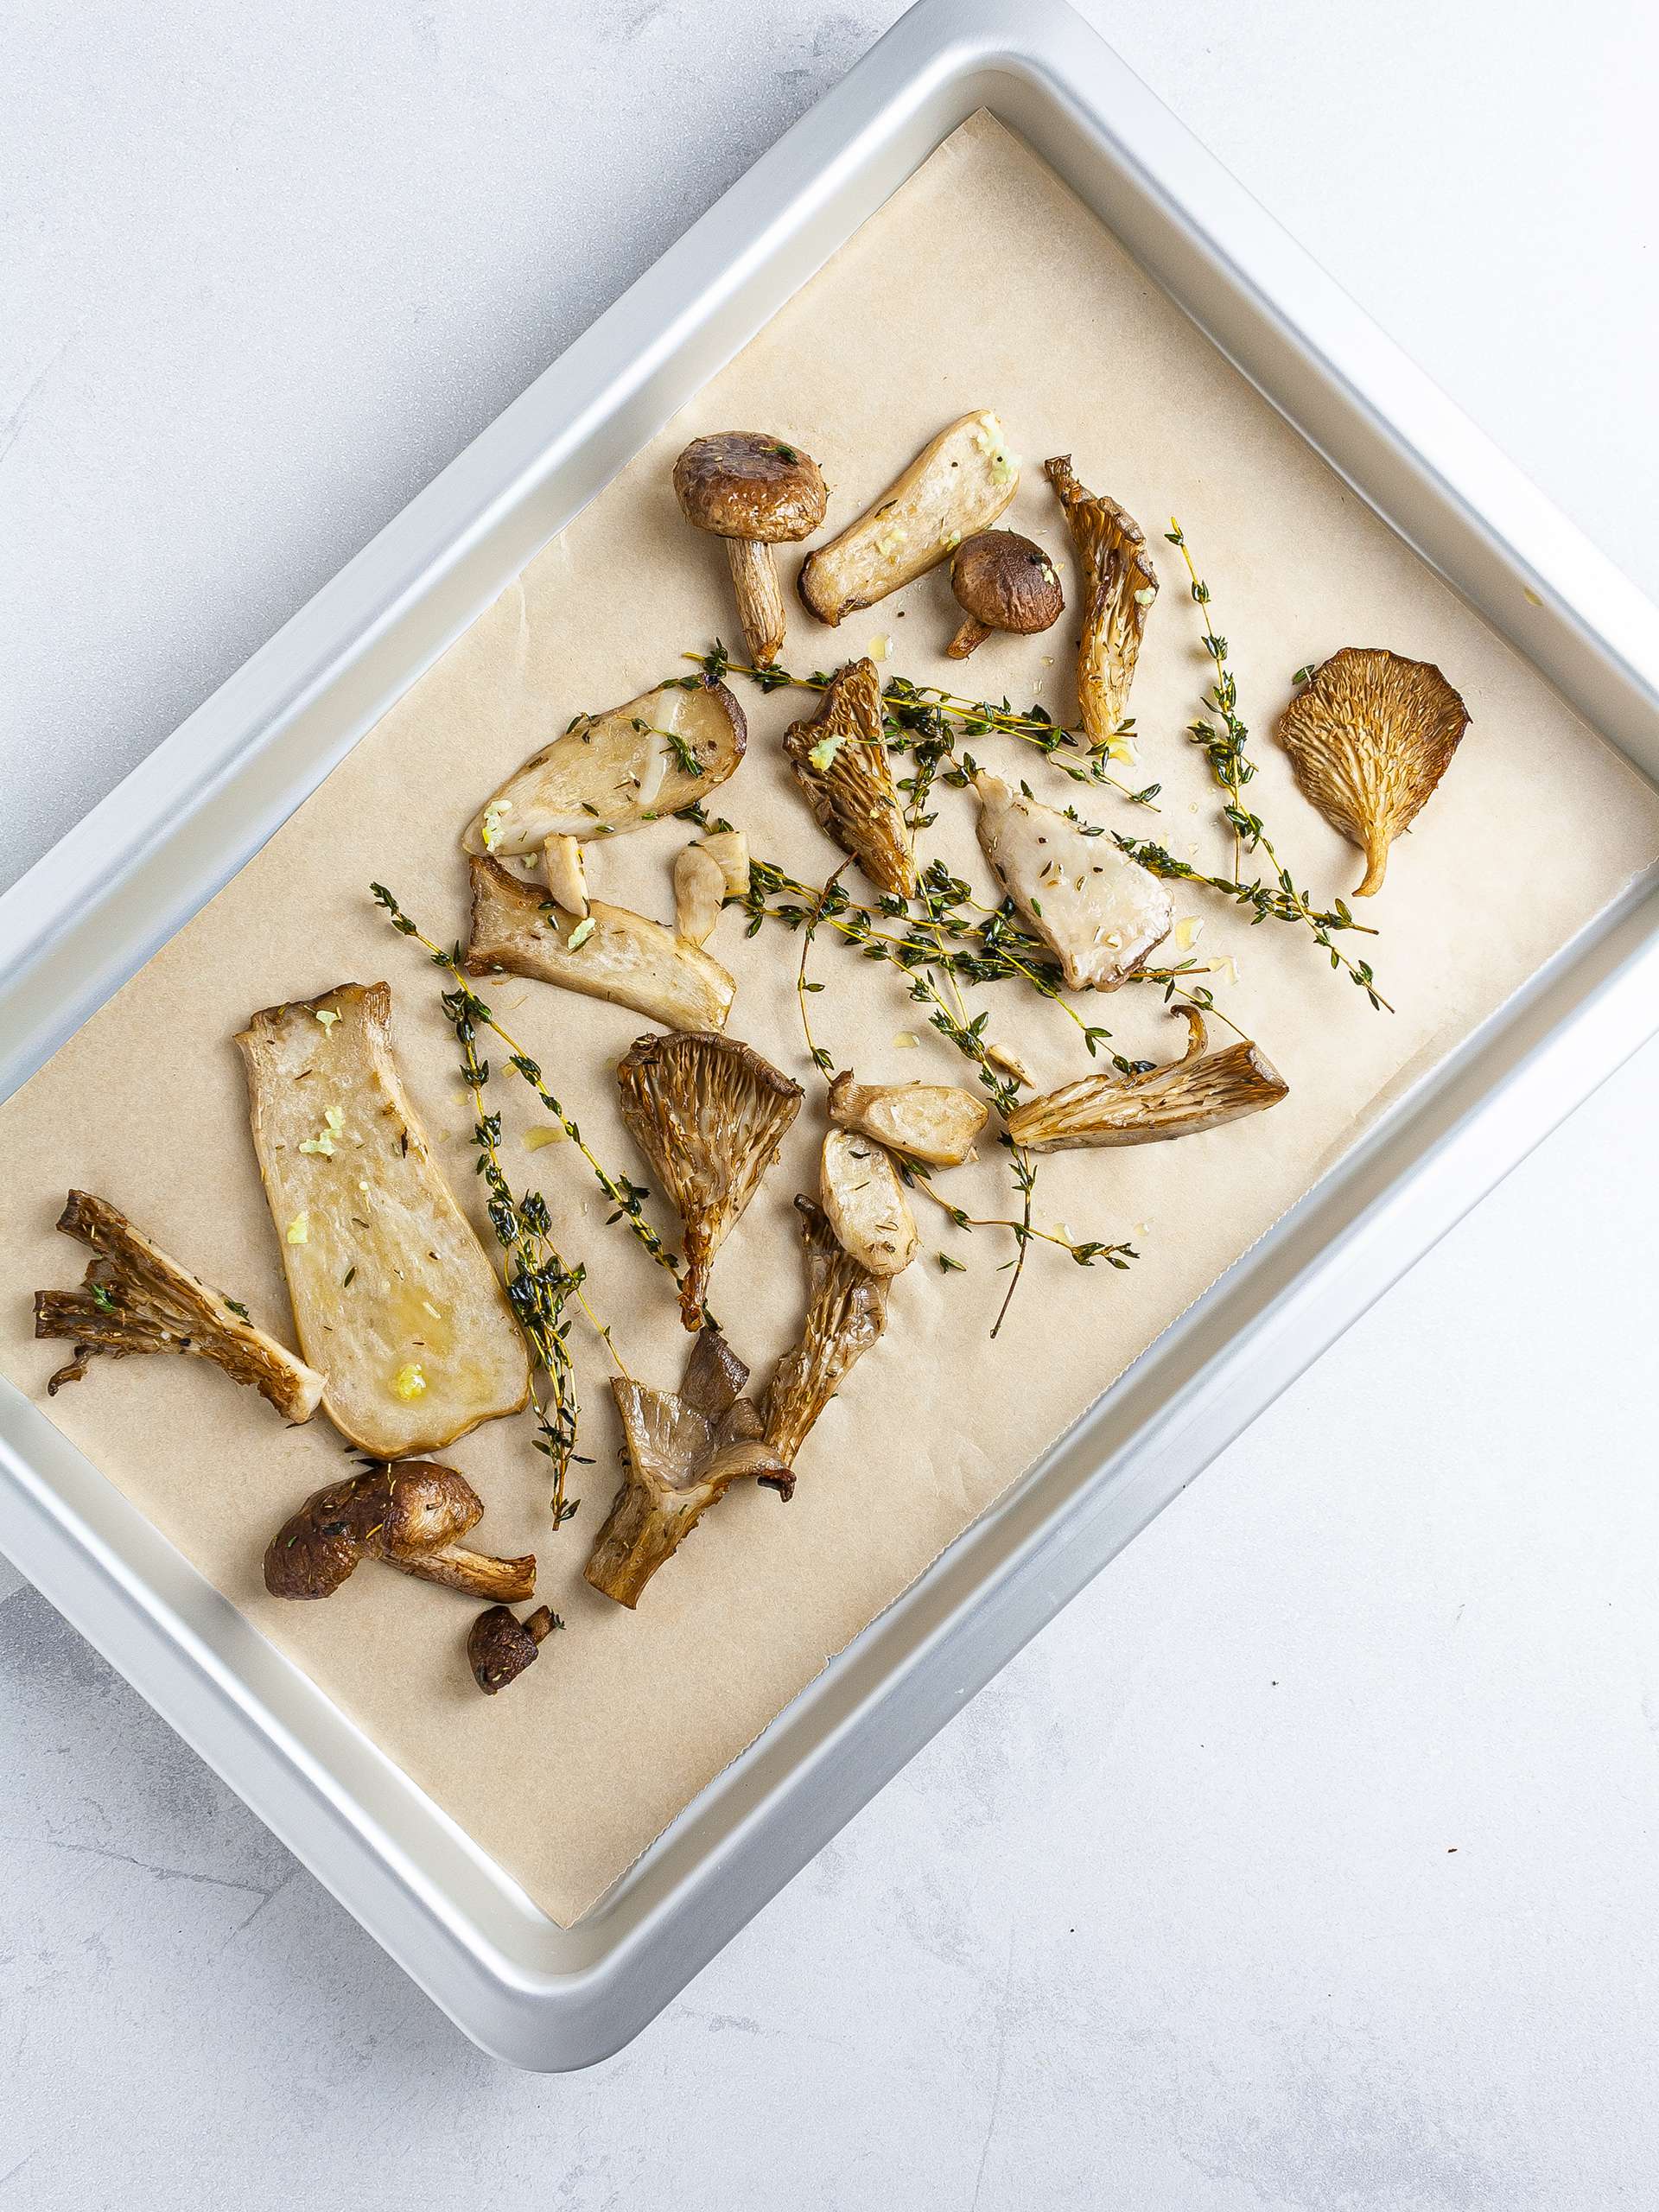 Roasted oyster and shiitake mushrooms with thyme